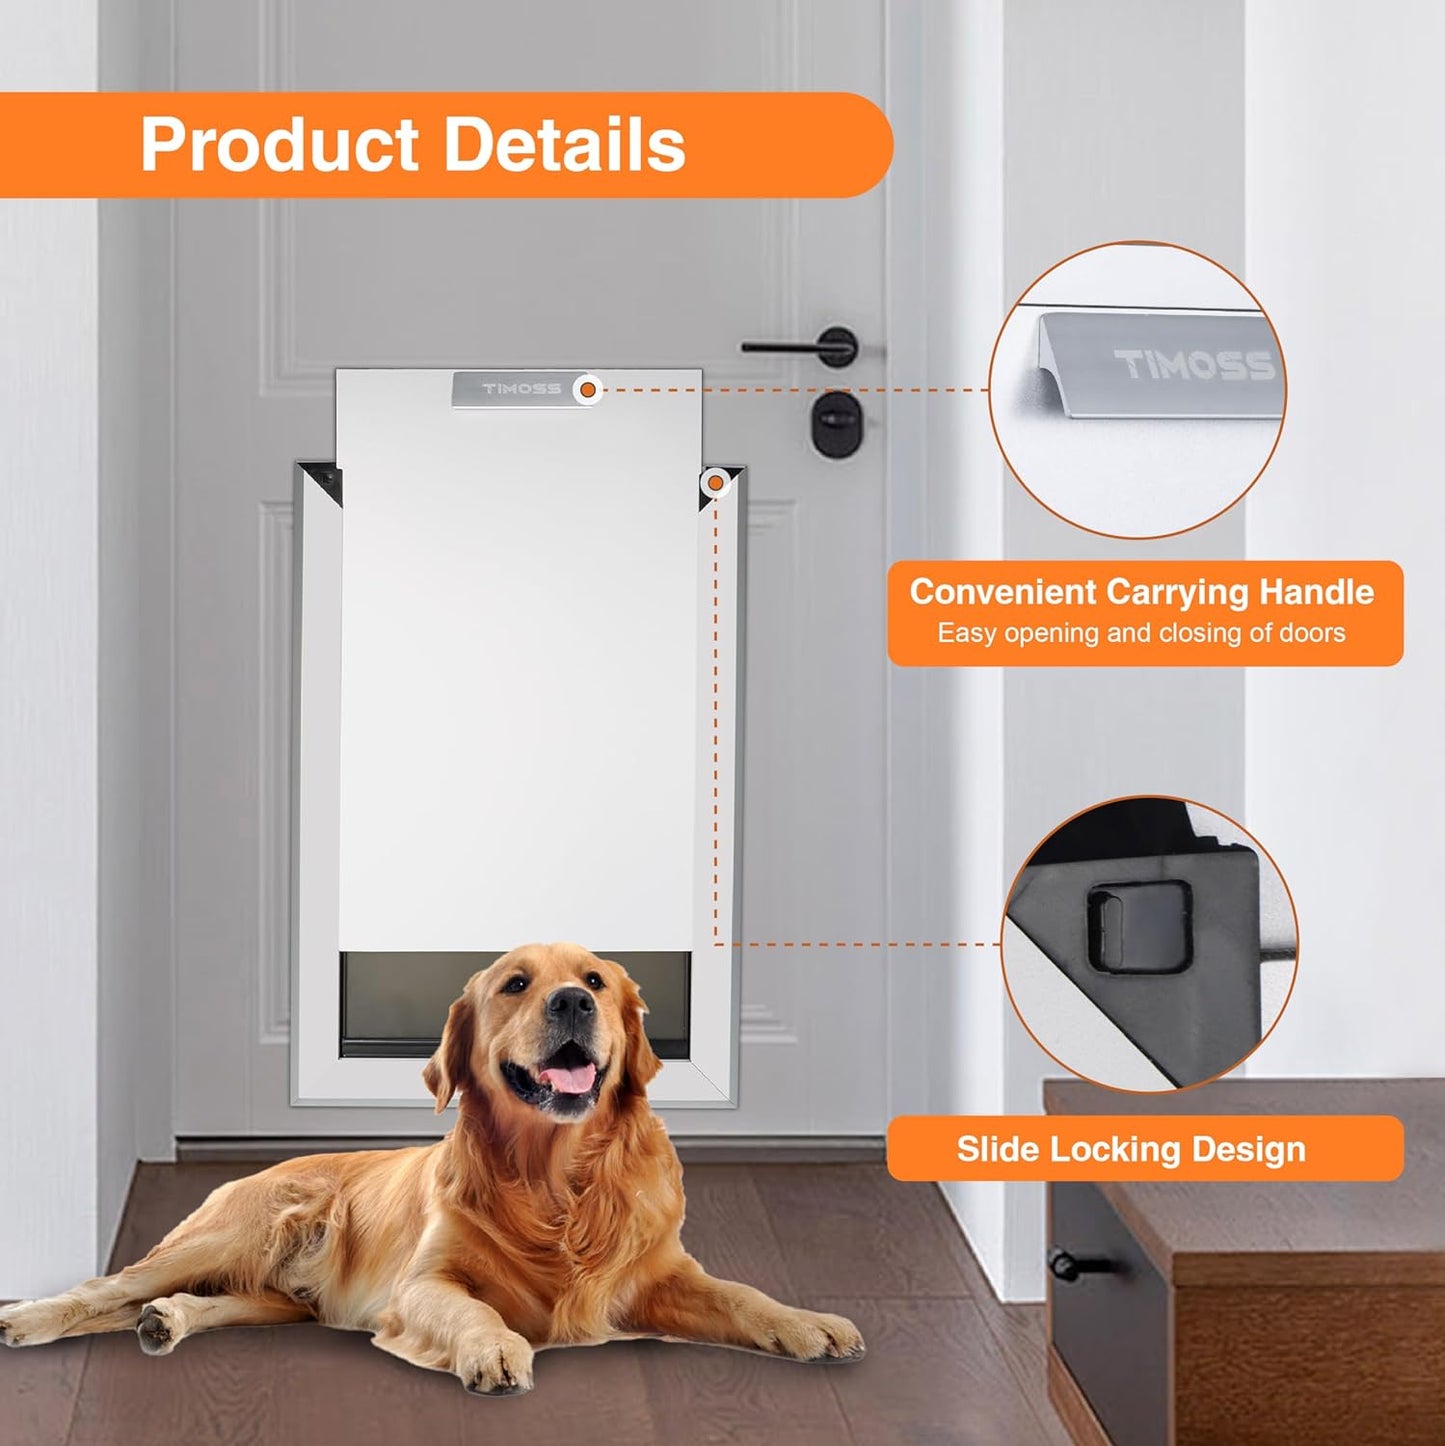 TIMOSS Aluminum Dog Door for Wall,Security Dog Door with Telescoping Tunnel and Sliding Locking Panel,Double Magnetic Flap, Portable Handle (X-Large (X-Large)